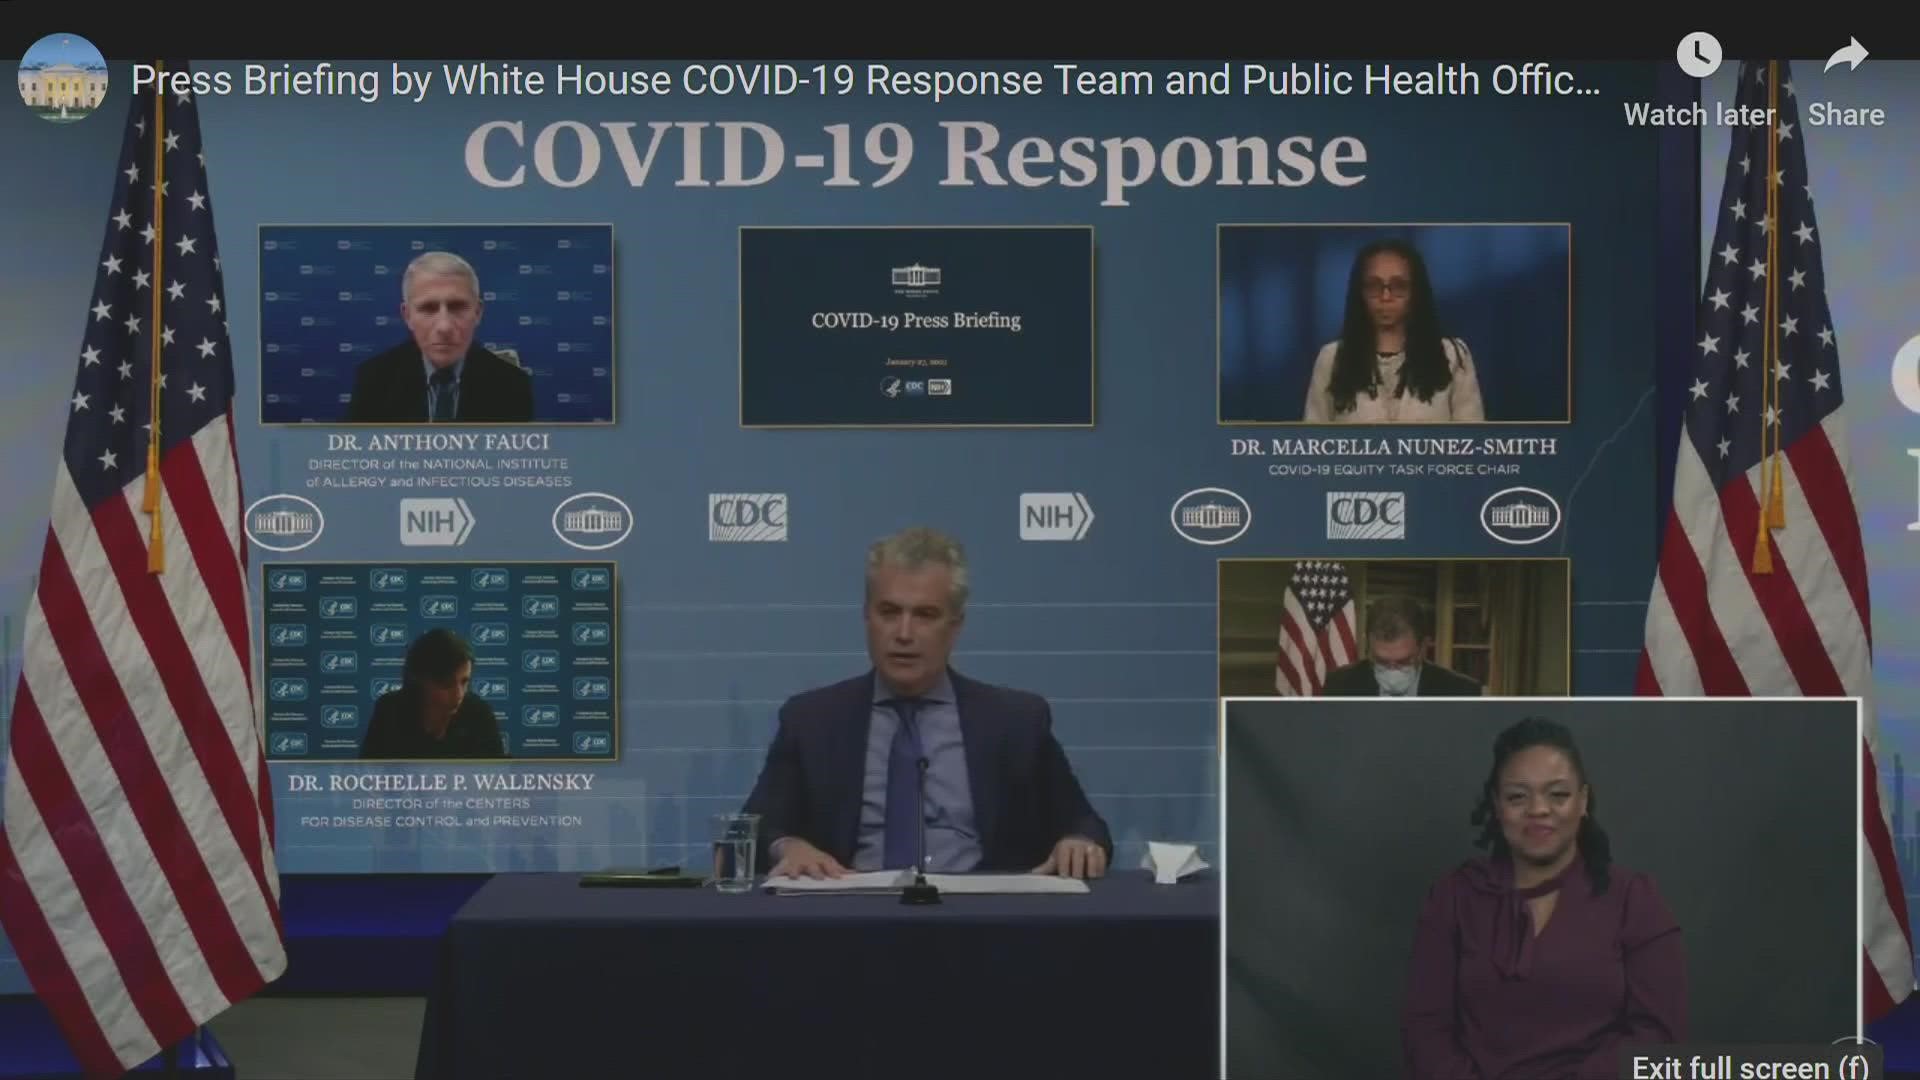 The first press briefing by the White House COVID-19 response team and public health officials on Jan. 27, 2021.